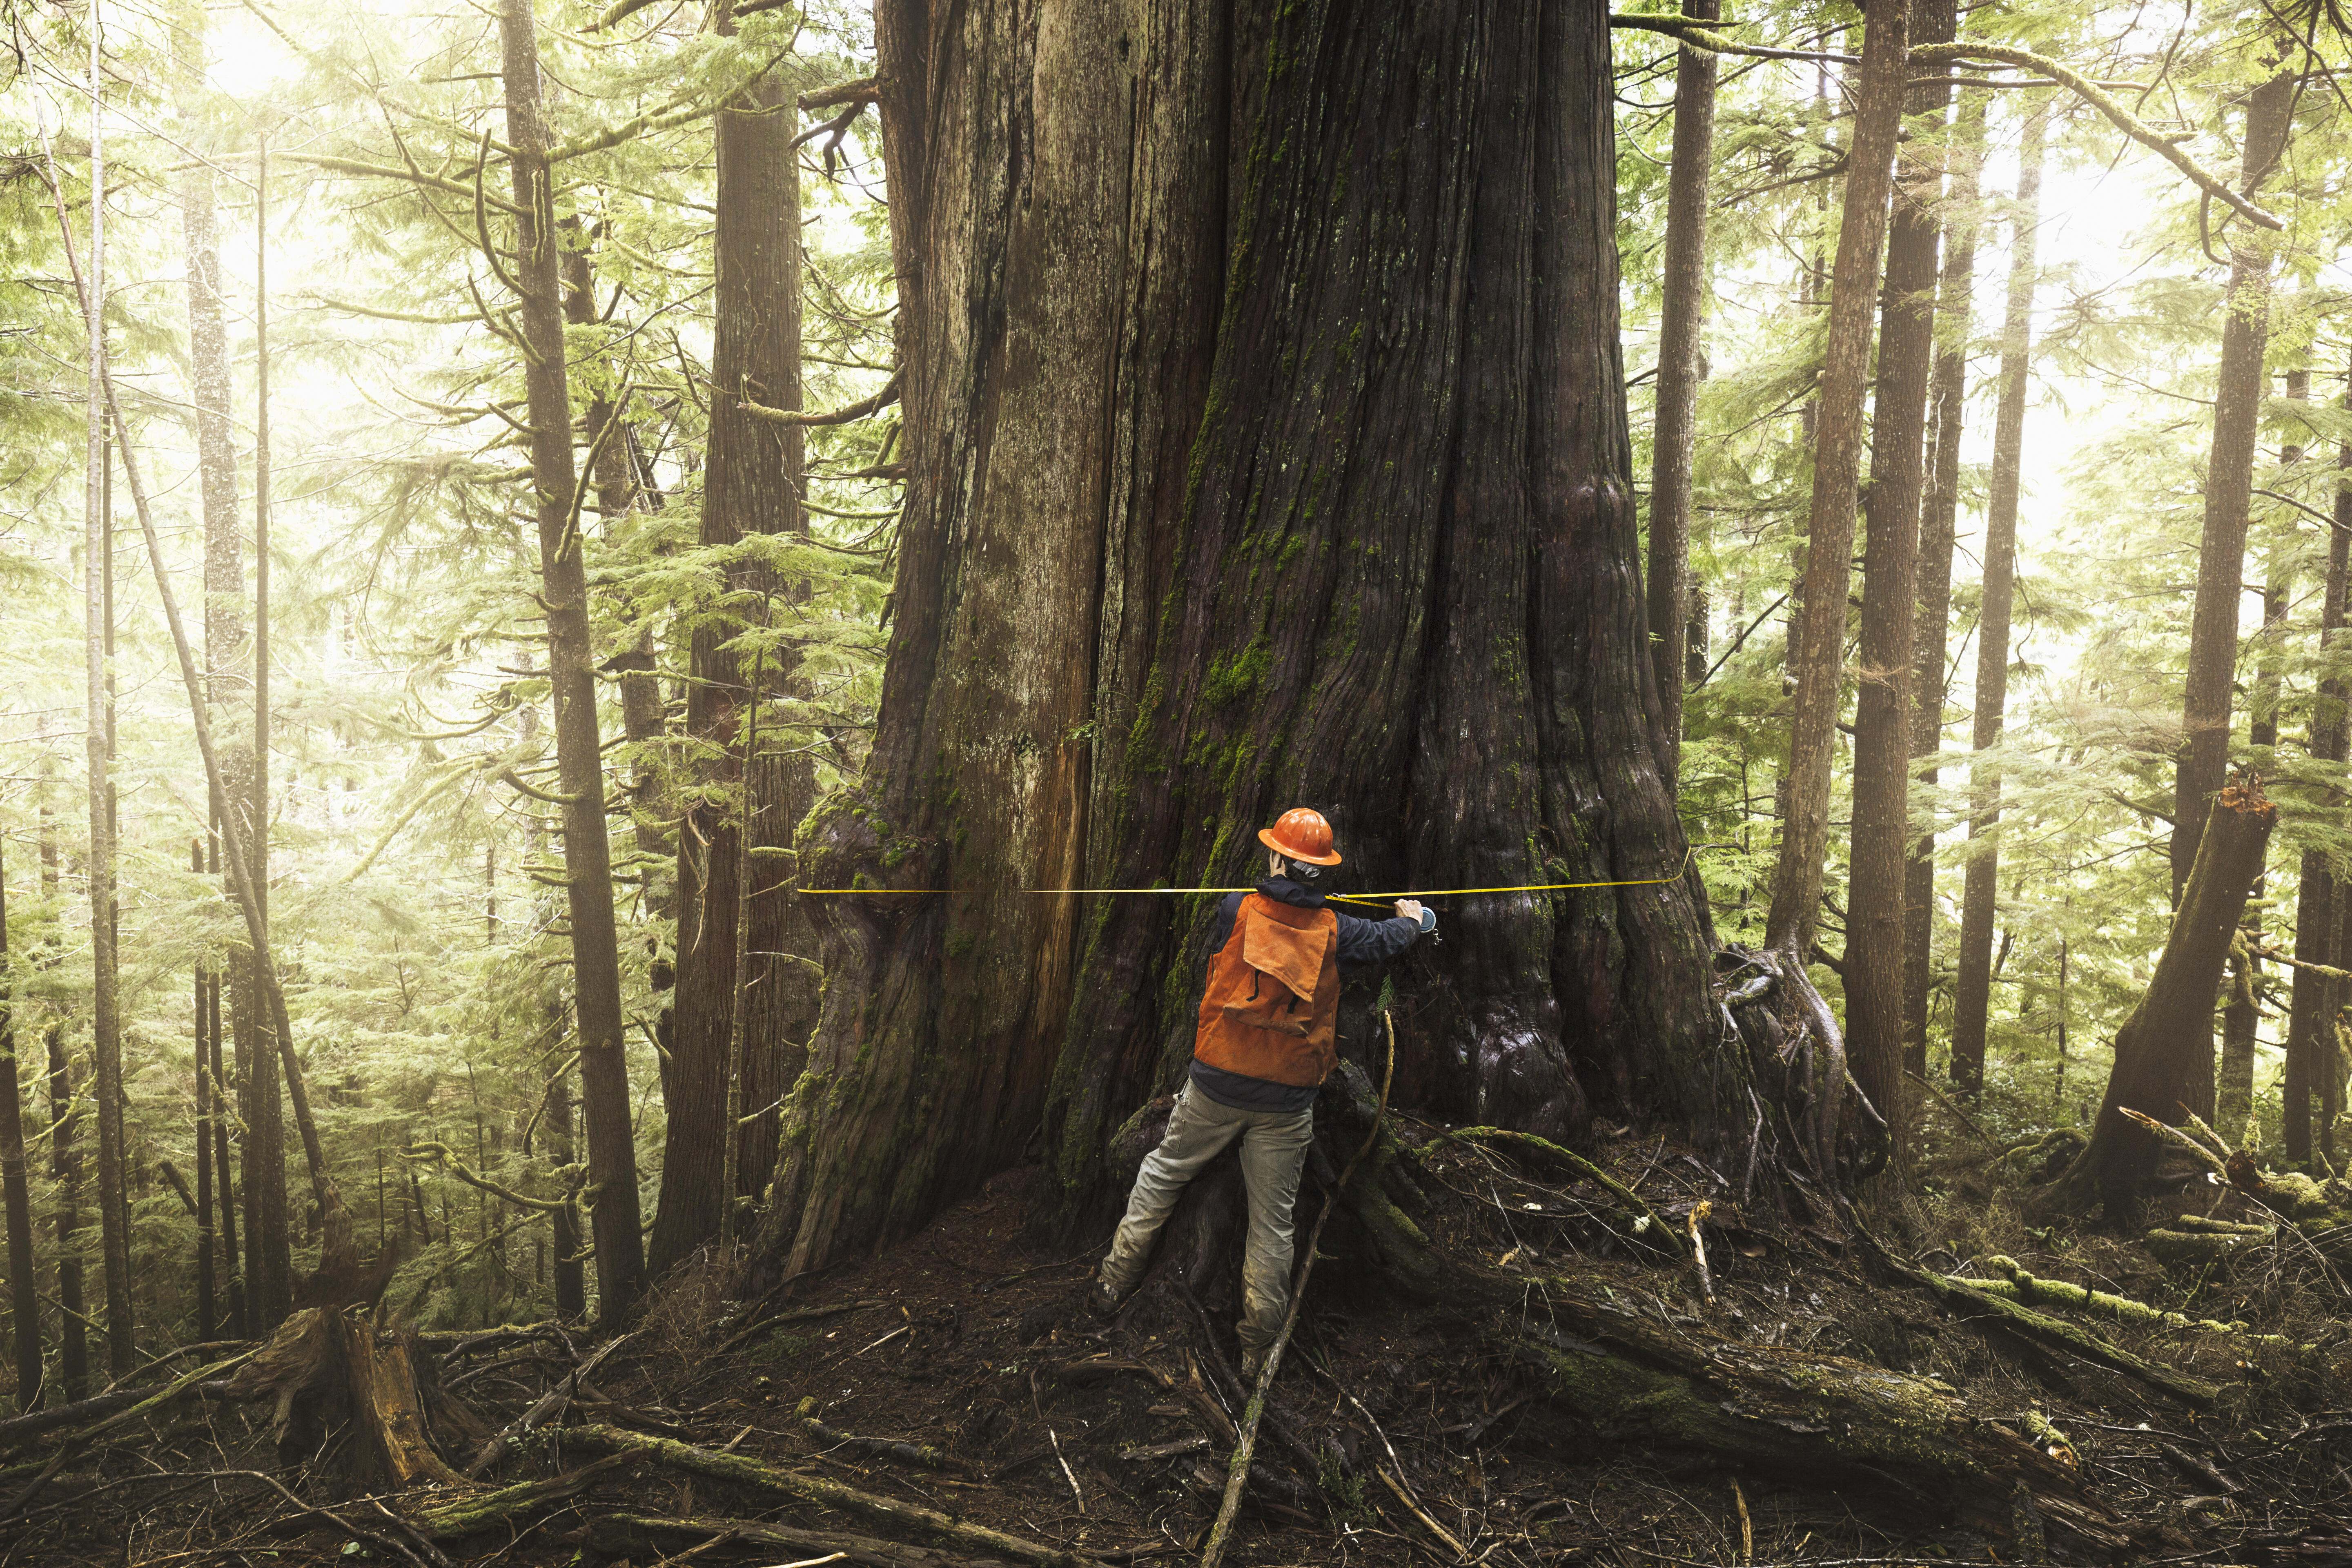 Photo of a man measuring an ancient tree in an old-growth forest in Washington state.